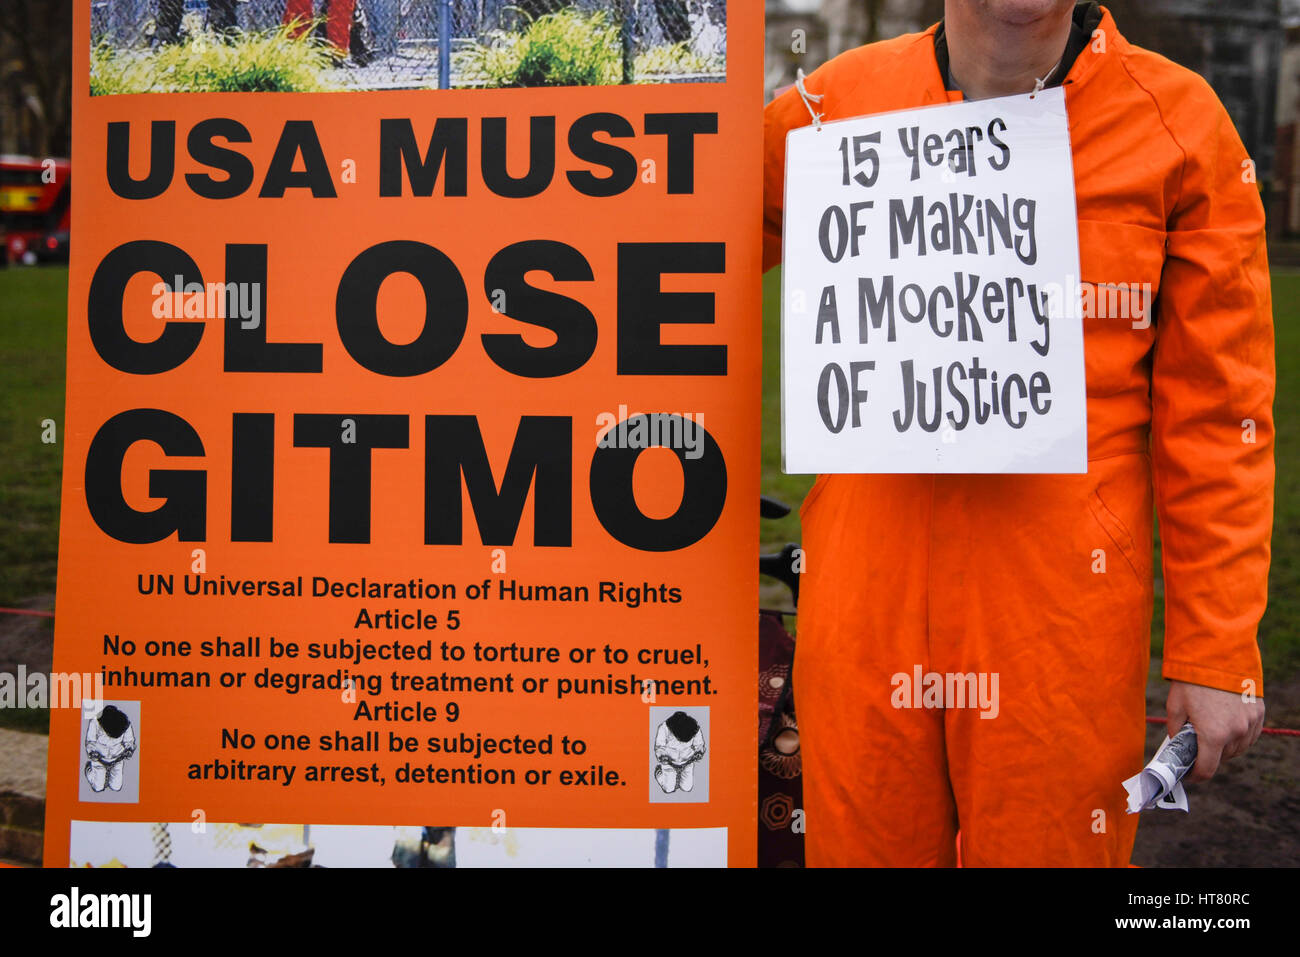 London, UK.  8 March 2017.  Members of Guantanamo Justice Campaign stage a protest in Parliament Square opposite the Houses of Parliament demanding that Donald Trump, President of the United States, close Guantanamo Bay concentration camp and calling on Theresa May, Prime Minister, to seek representations from President Trump that it will be a closure, not a relocation to a mainland US prison.  Credit: Stephen Chung / Alamy Live News Stock Photo